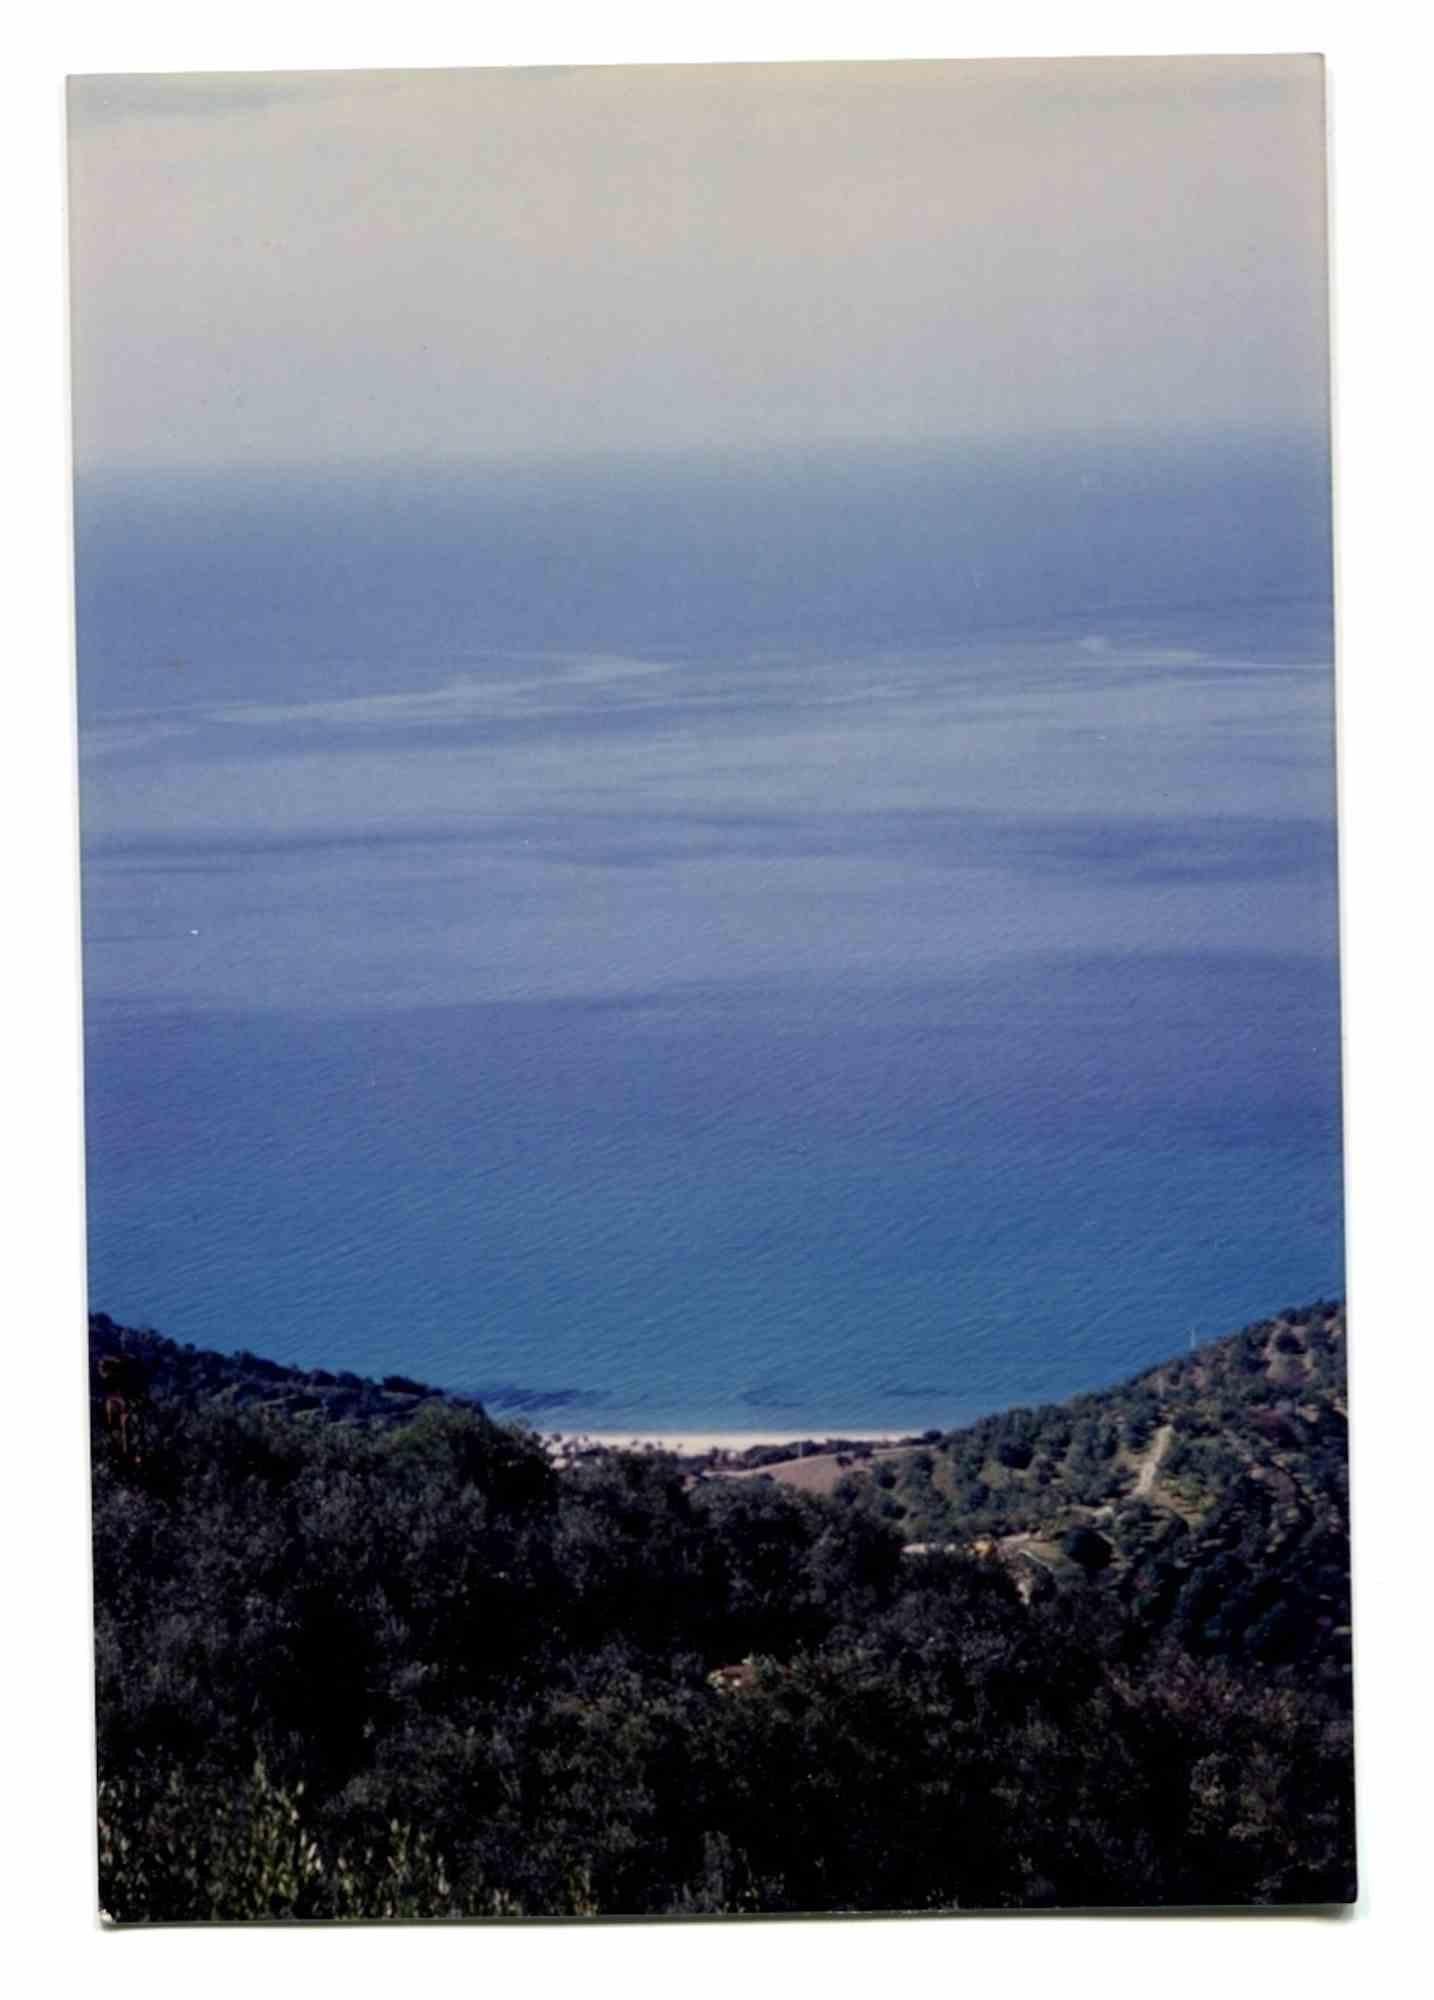 Unknown Landscape Photograph - Reportage from Albania - Lukovë - Photograph - Late 1970s